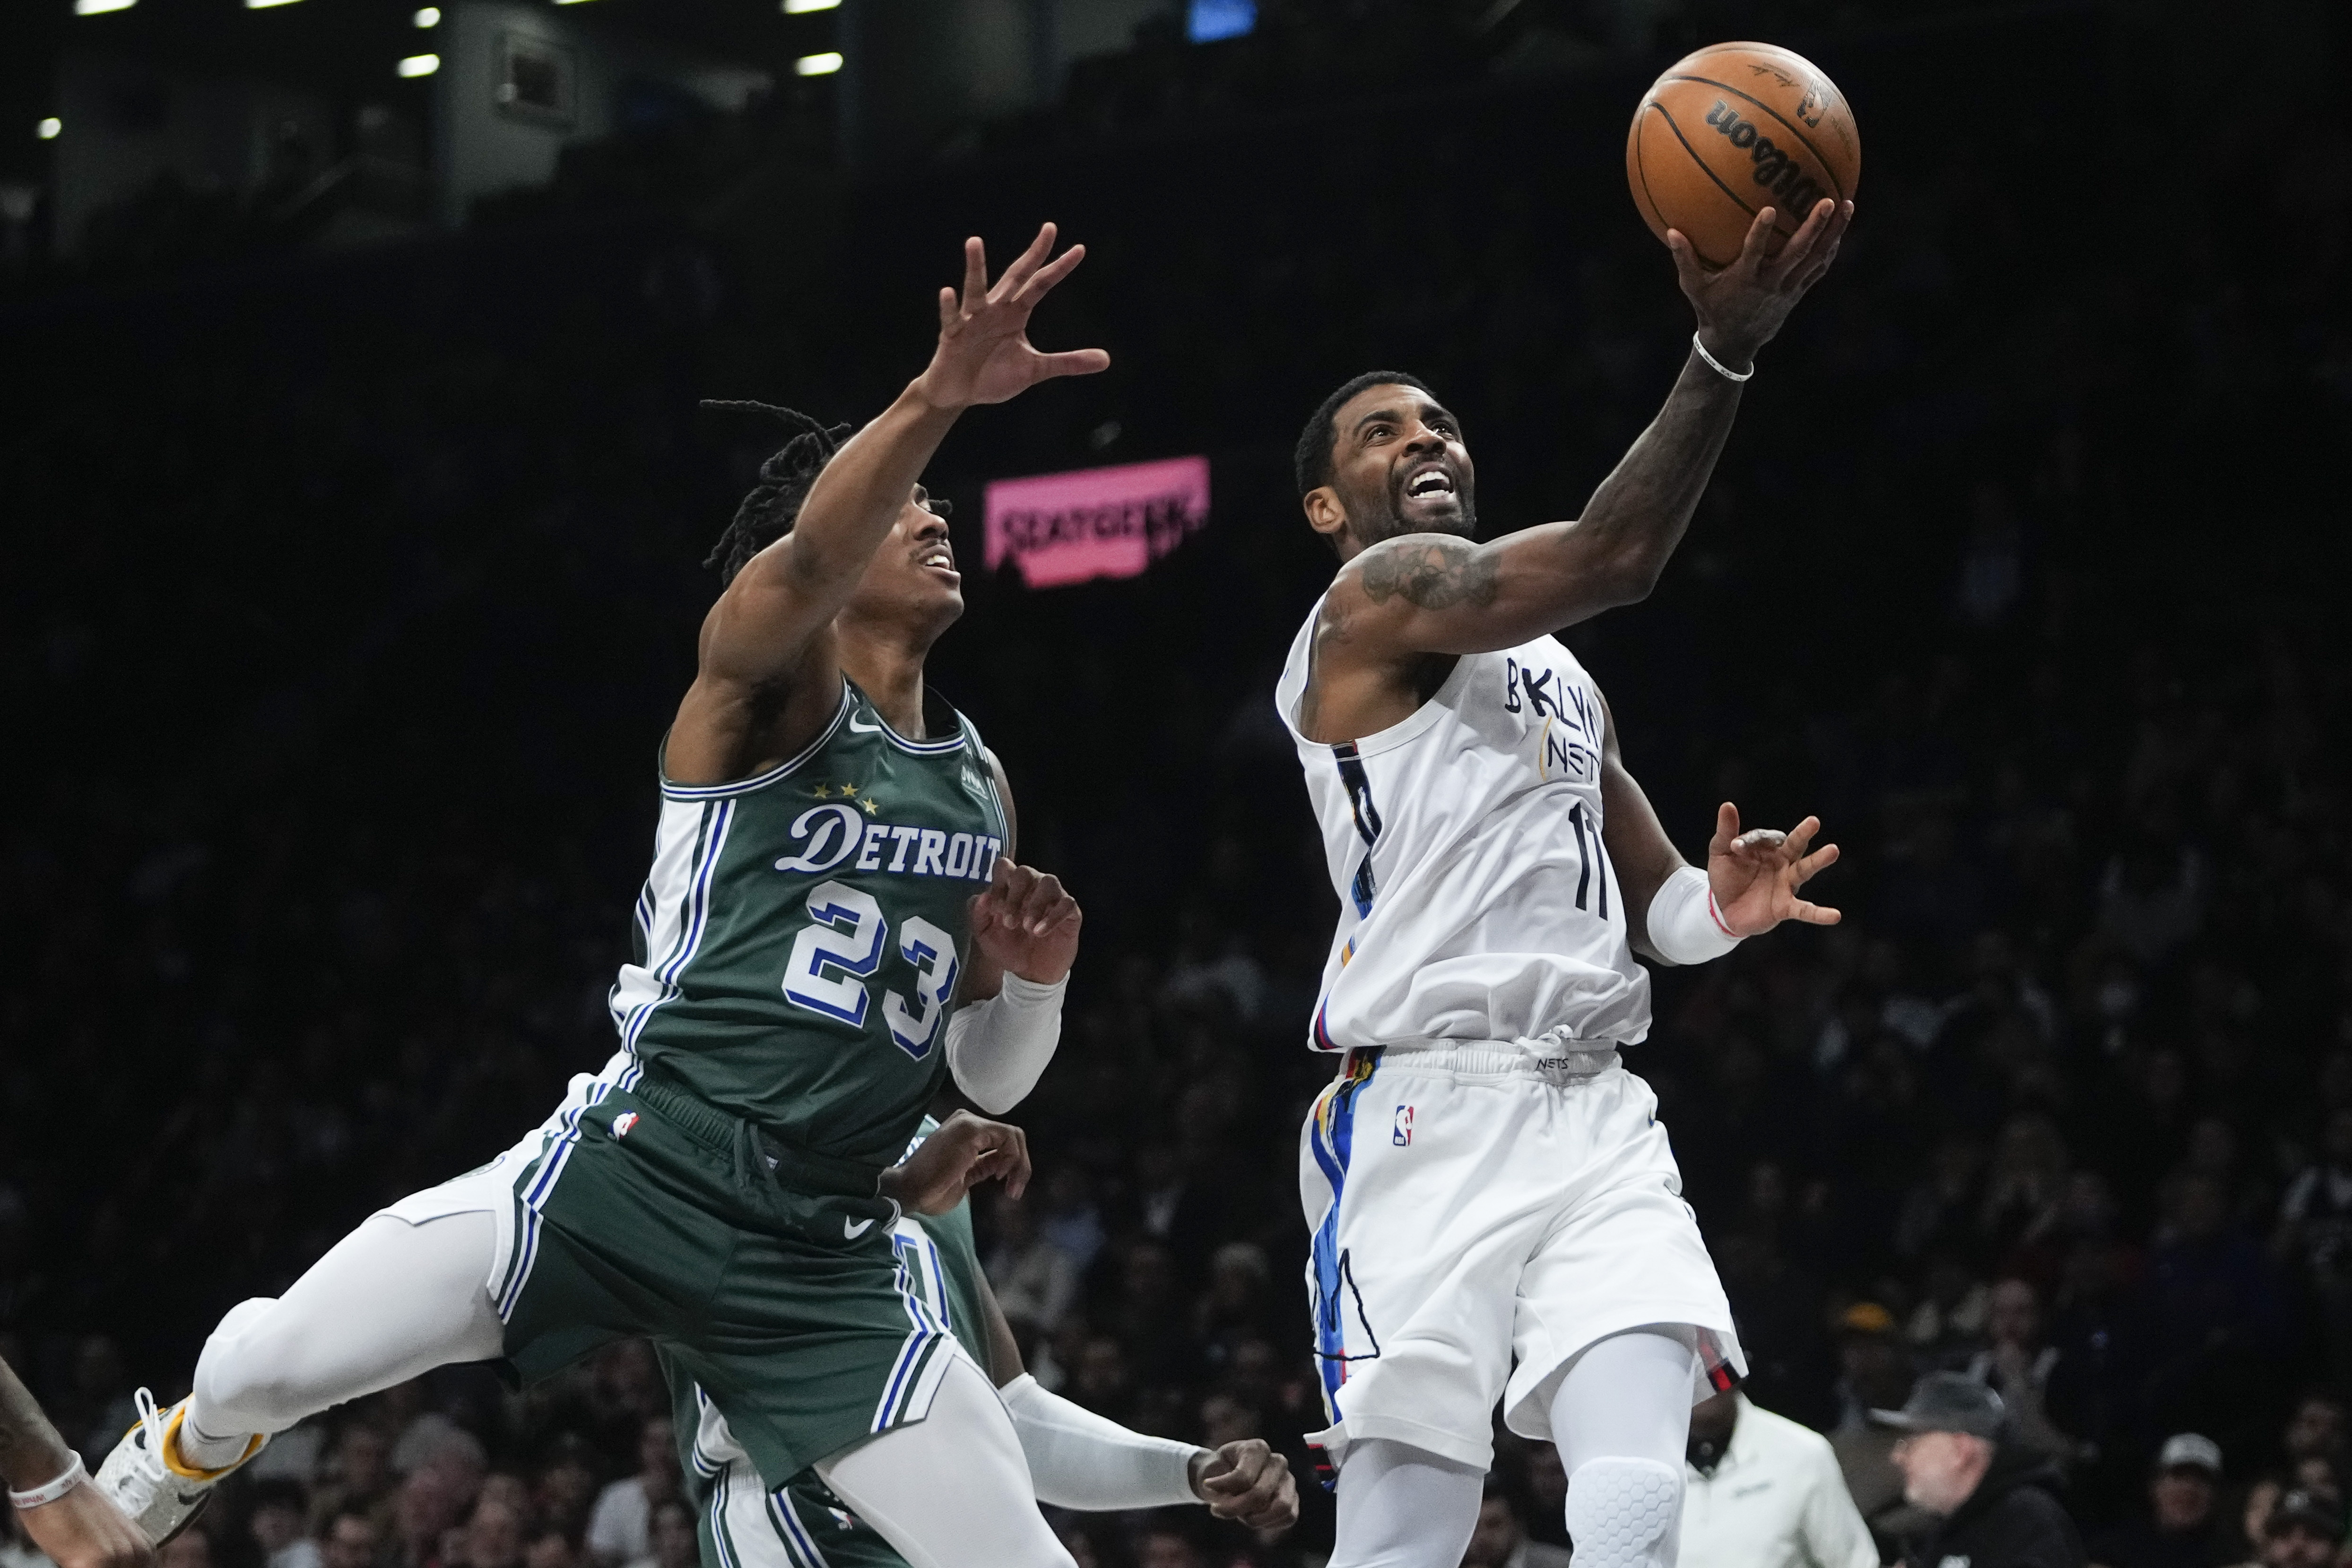 Inside look at Kyrie Irving's chaotic tenure with Nets